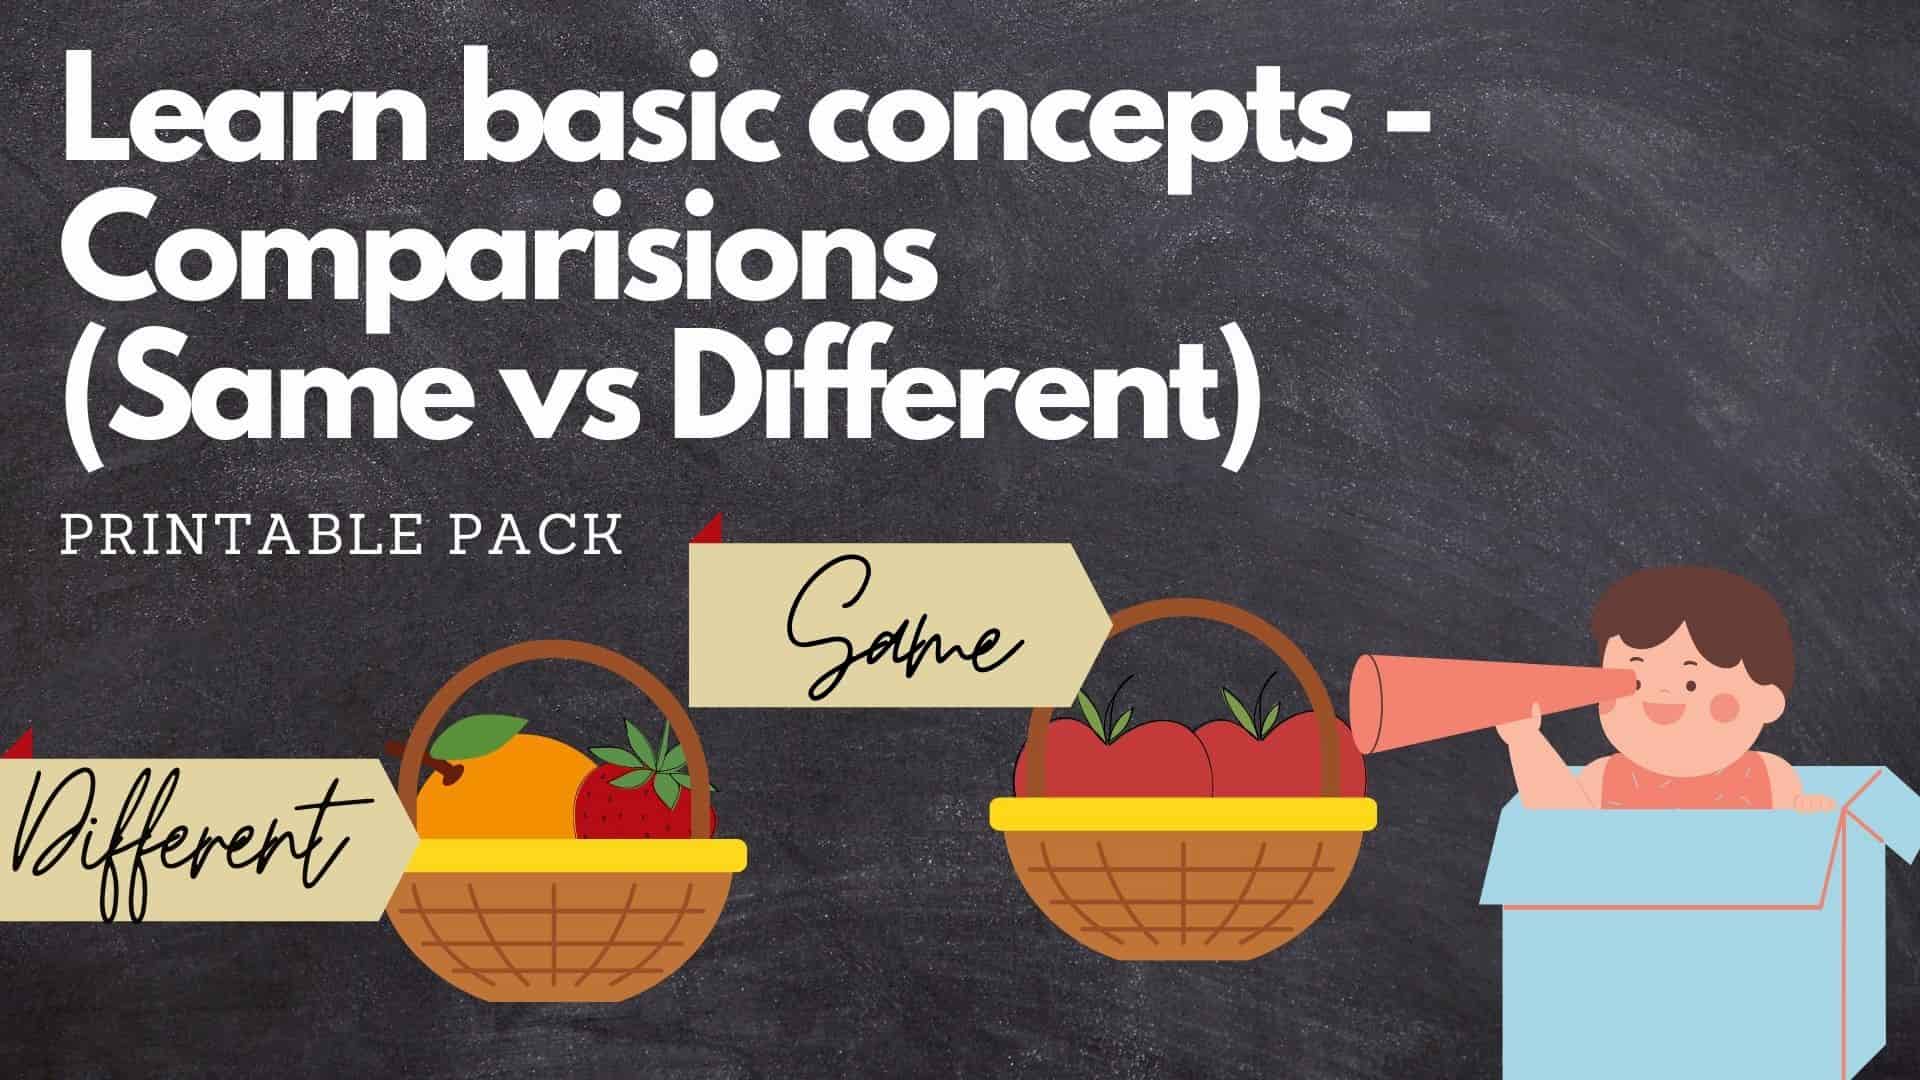 Basic Concept - Same and Different